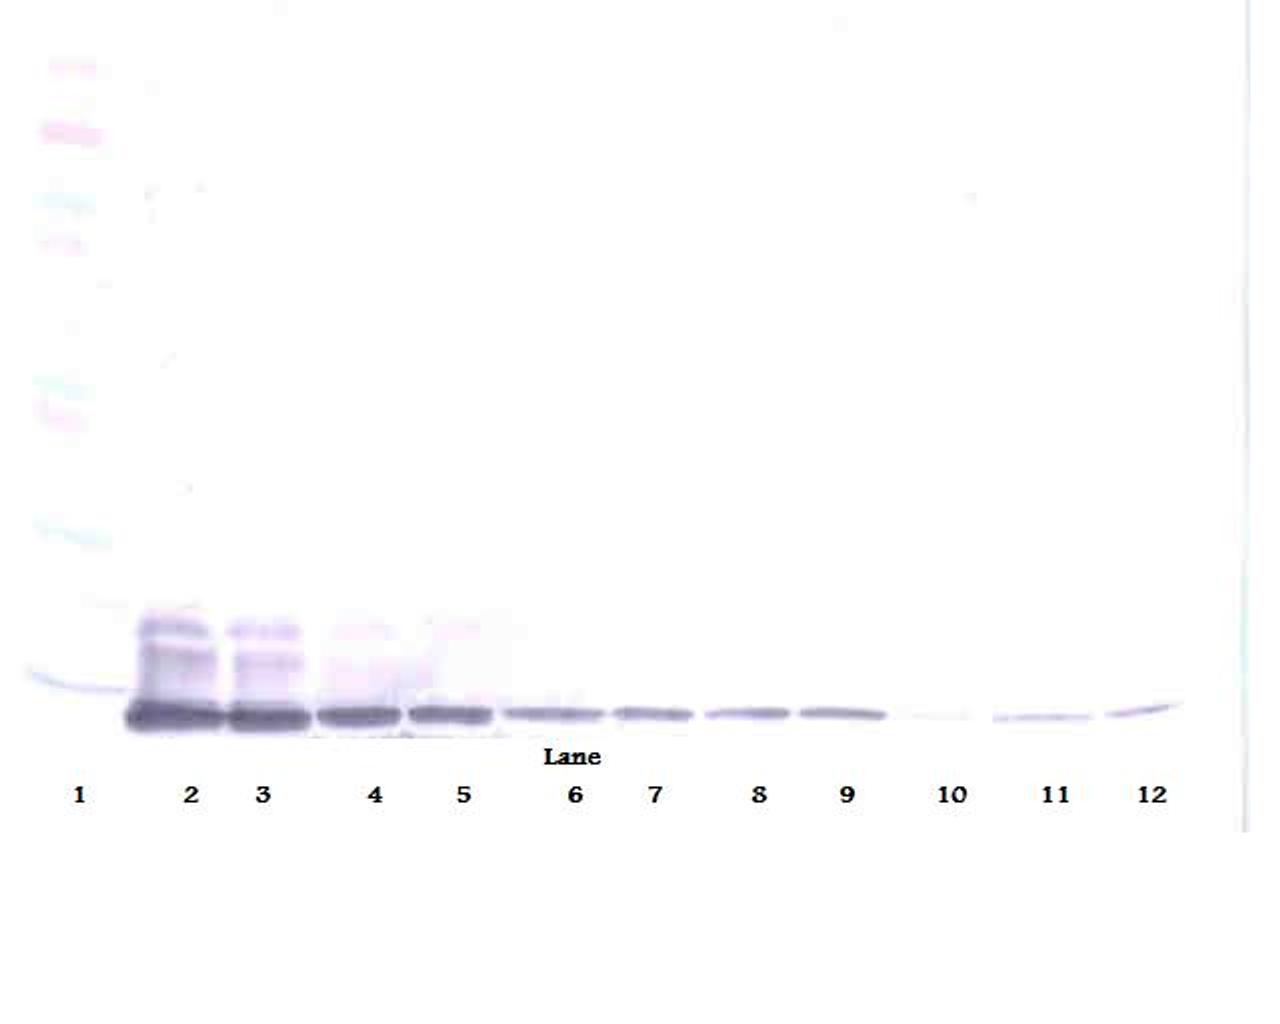 To detect mMCP-3 by Western Blot analysis this antibody can be used at a concentration of 0.1 - 0.2 ug/ml. Used in conjunction with compatible secondary reagents the detection limit for recombinant mMCP-3 is 1.5 - 3.0 ng/lane, under either reducing or non-reducing conditions.